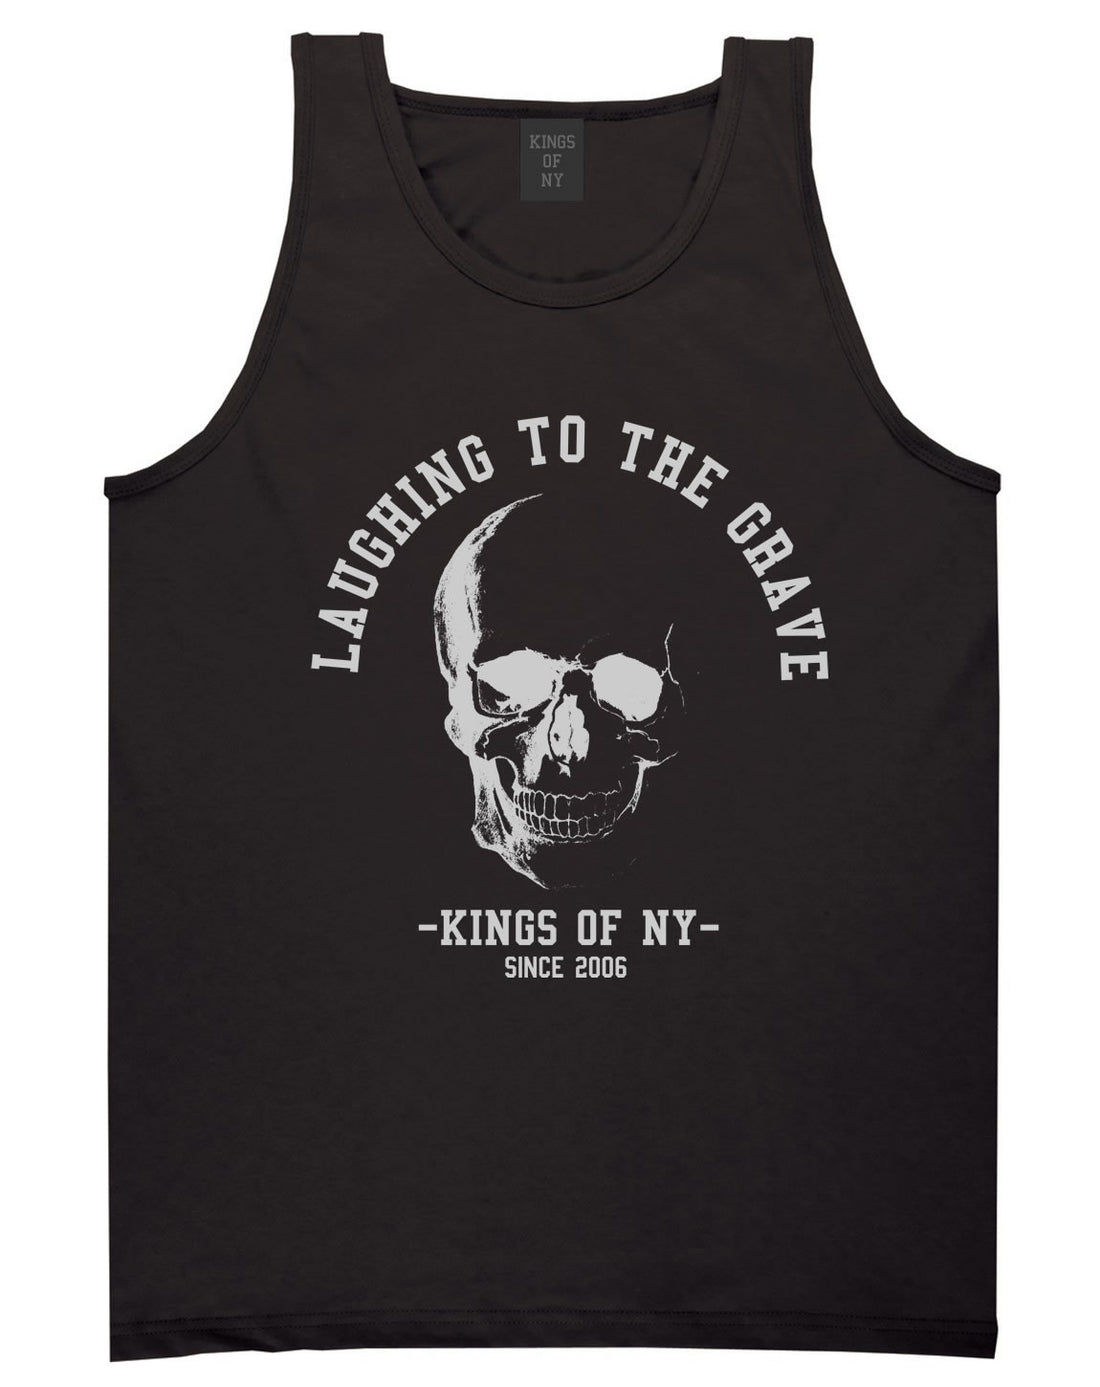 Laughing To The Grave Skull 2006 Tank Top in Black By Kings Of NY